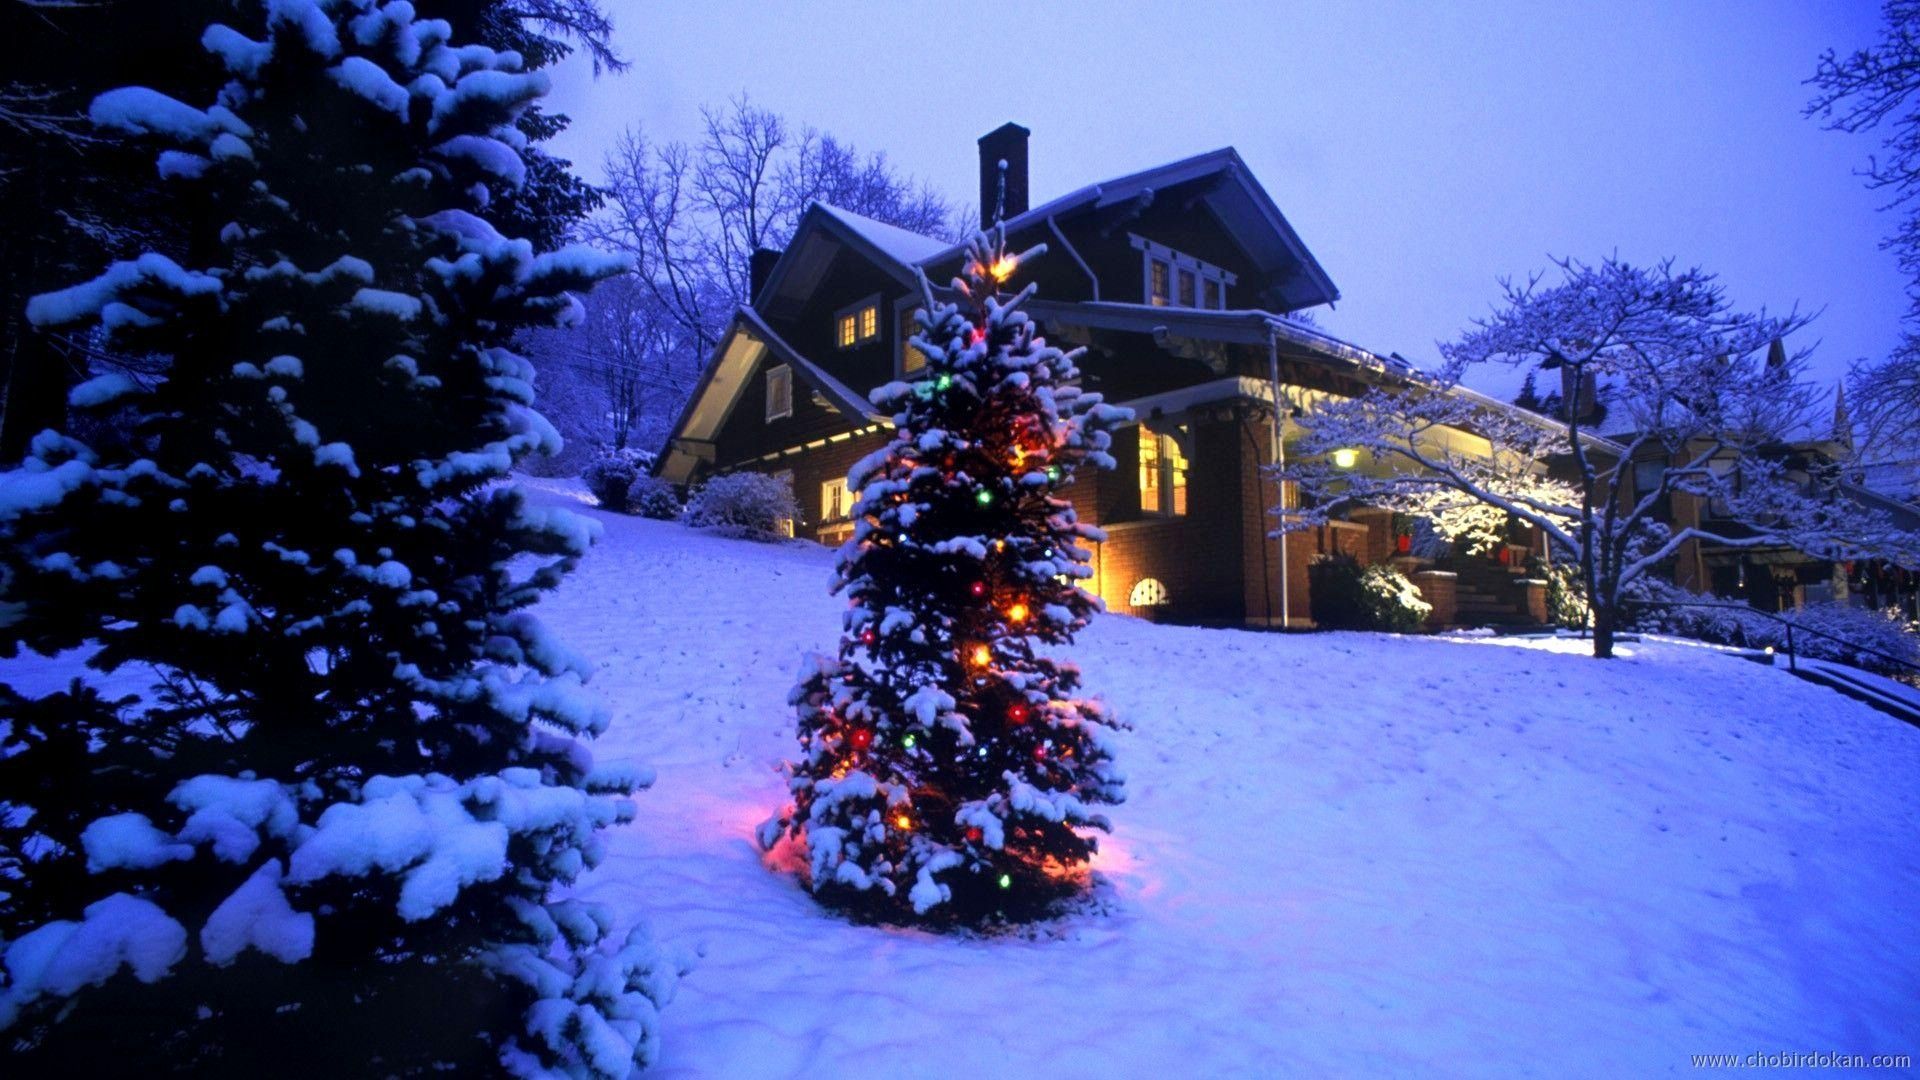 Country Christmas Wallpaper Luxury Animated Snow Christmas Card Shop Free Pc Help Magazine Inspiration of The Hudson